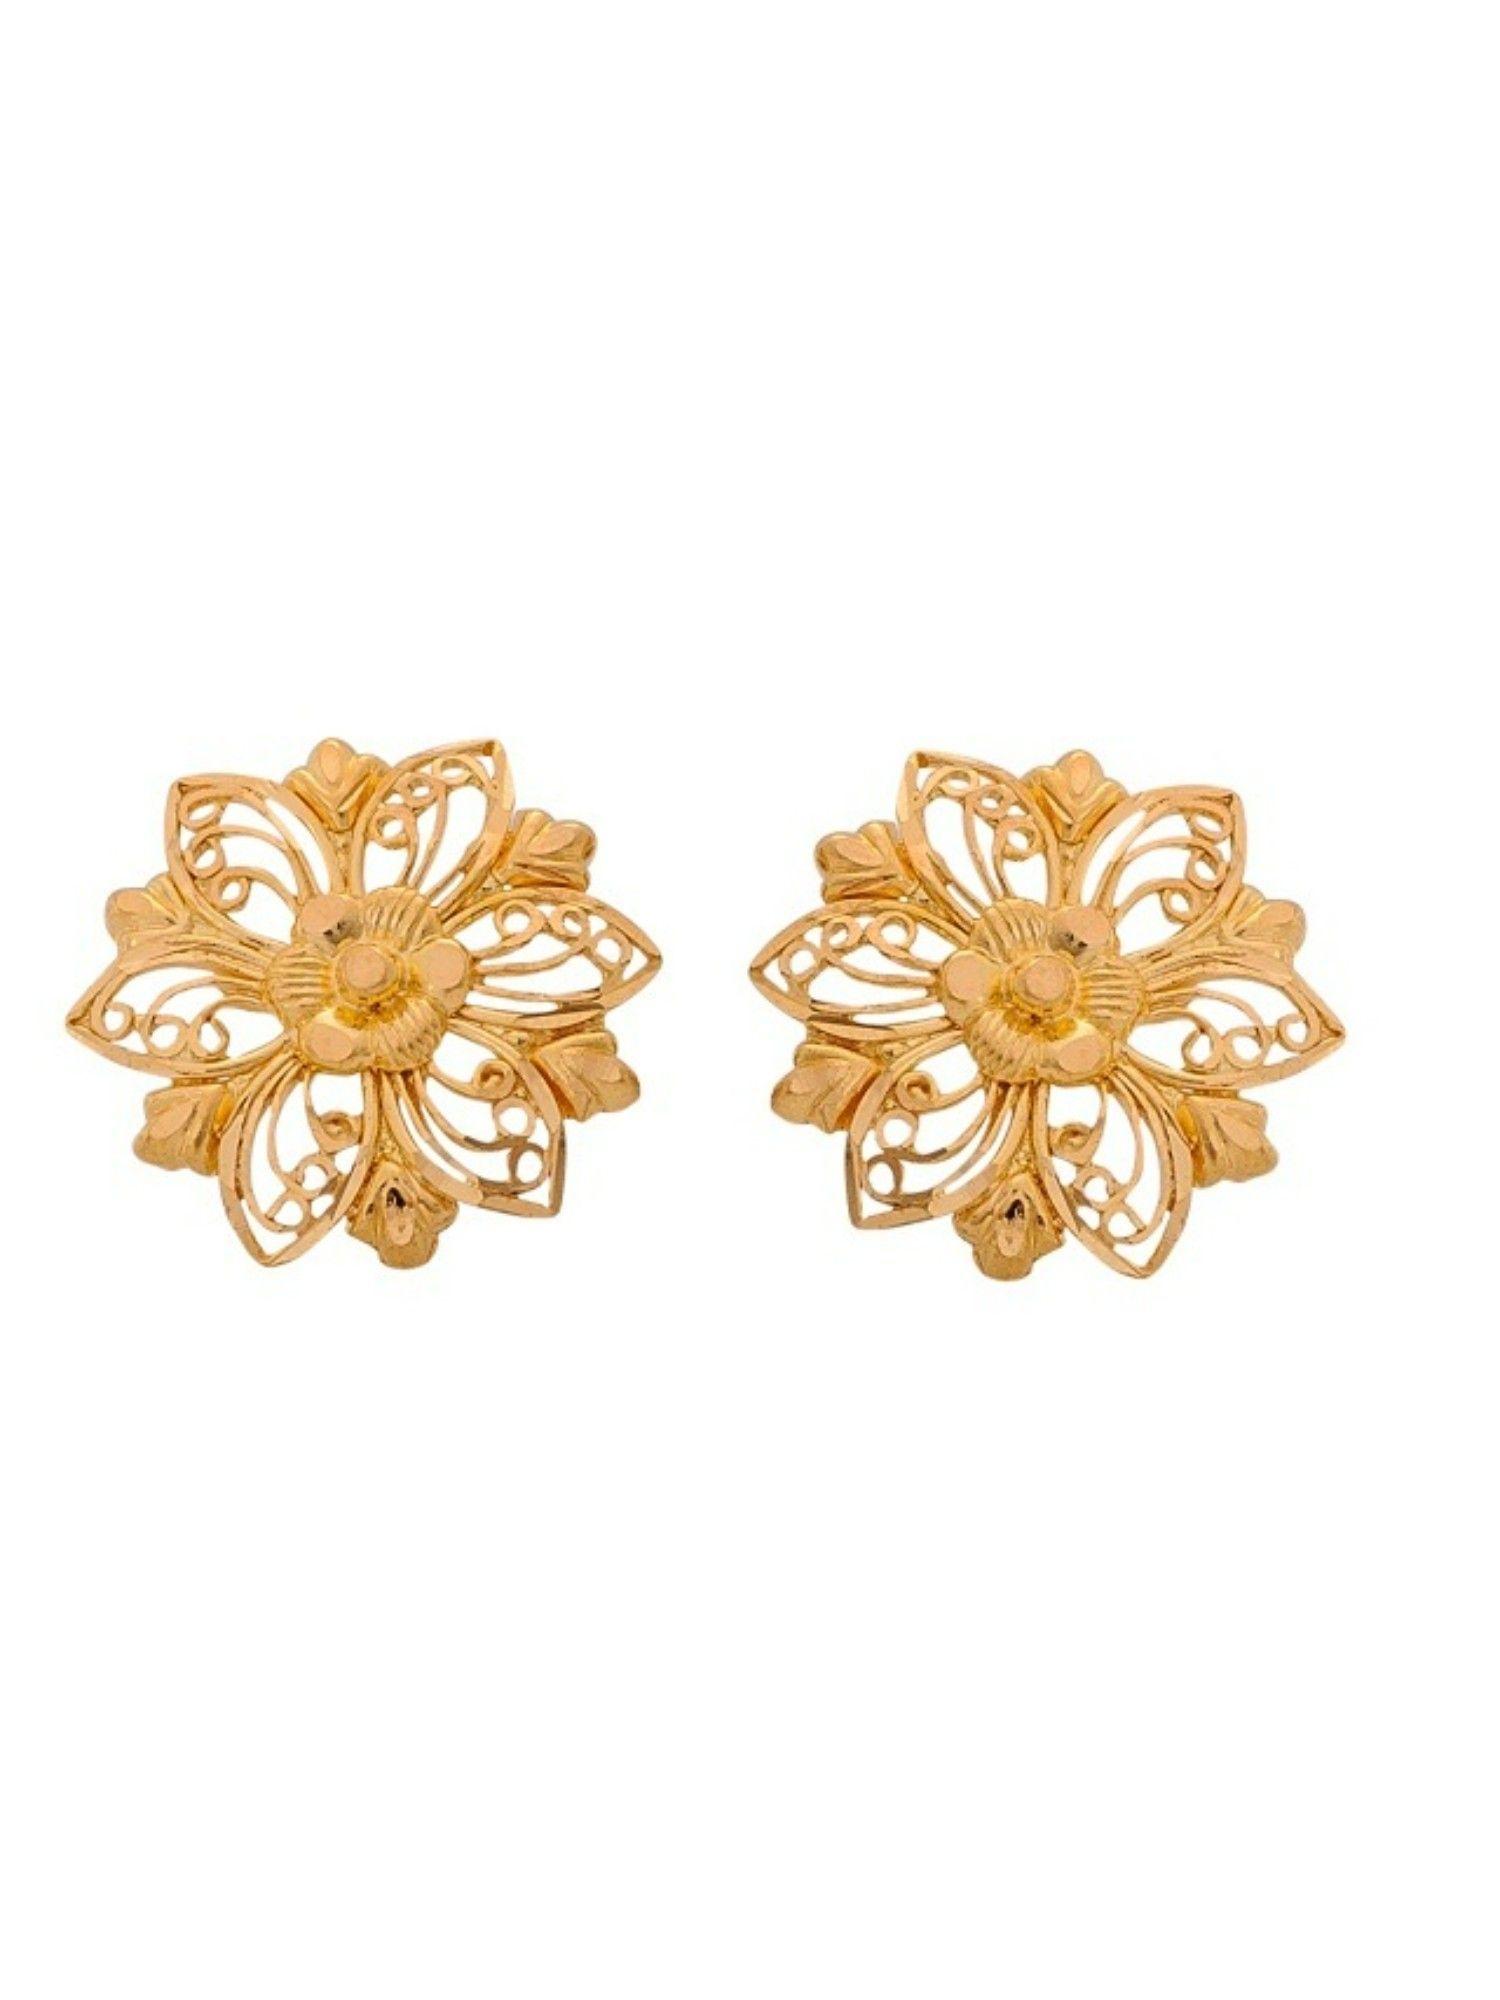 22k yellow gold blooming filigree floral studs